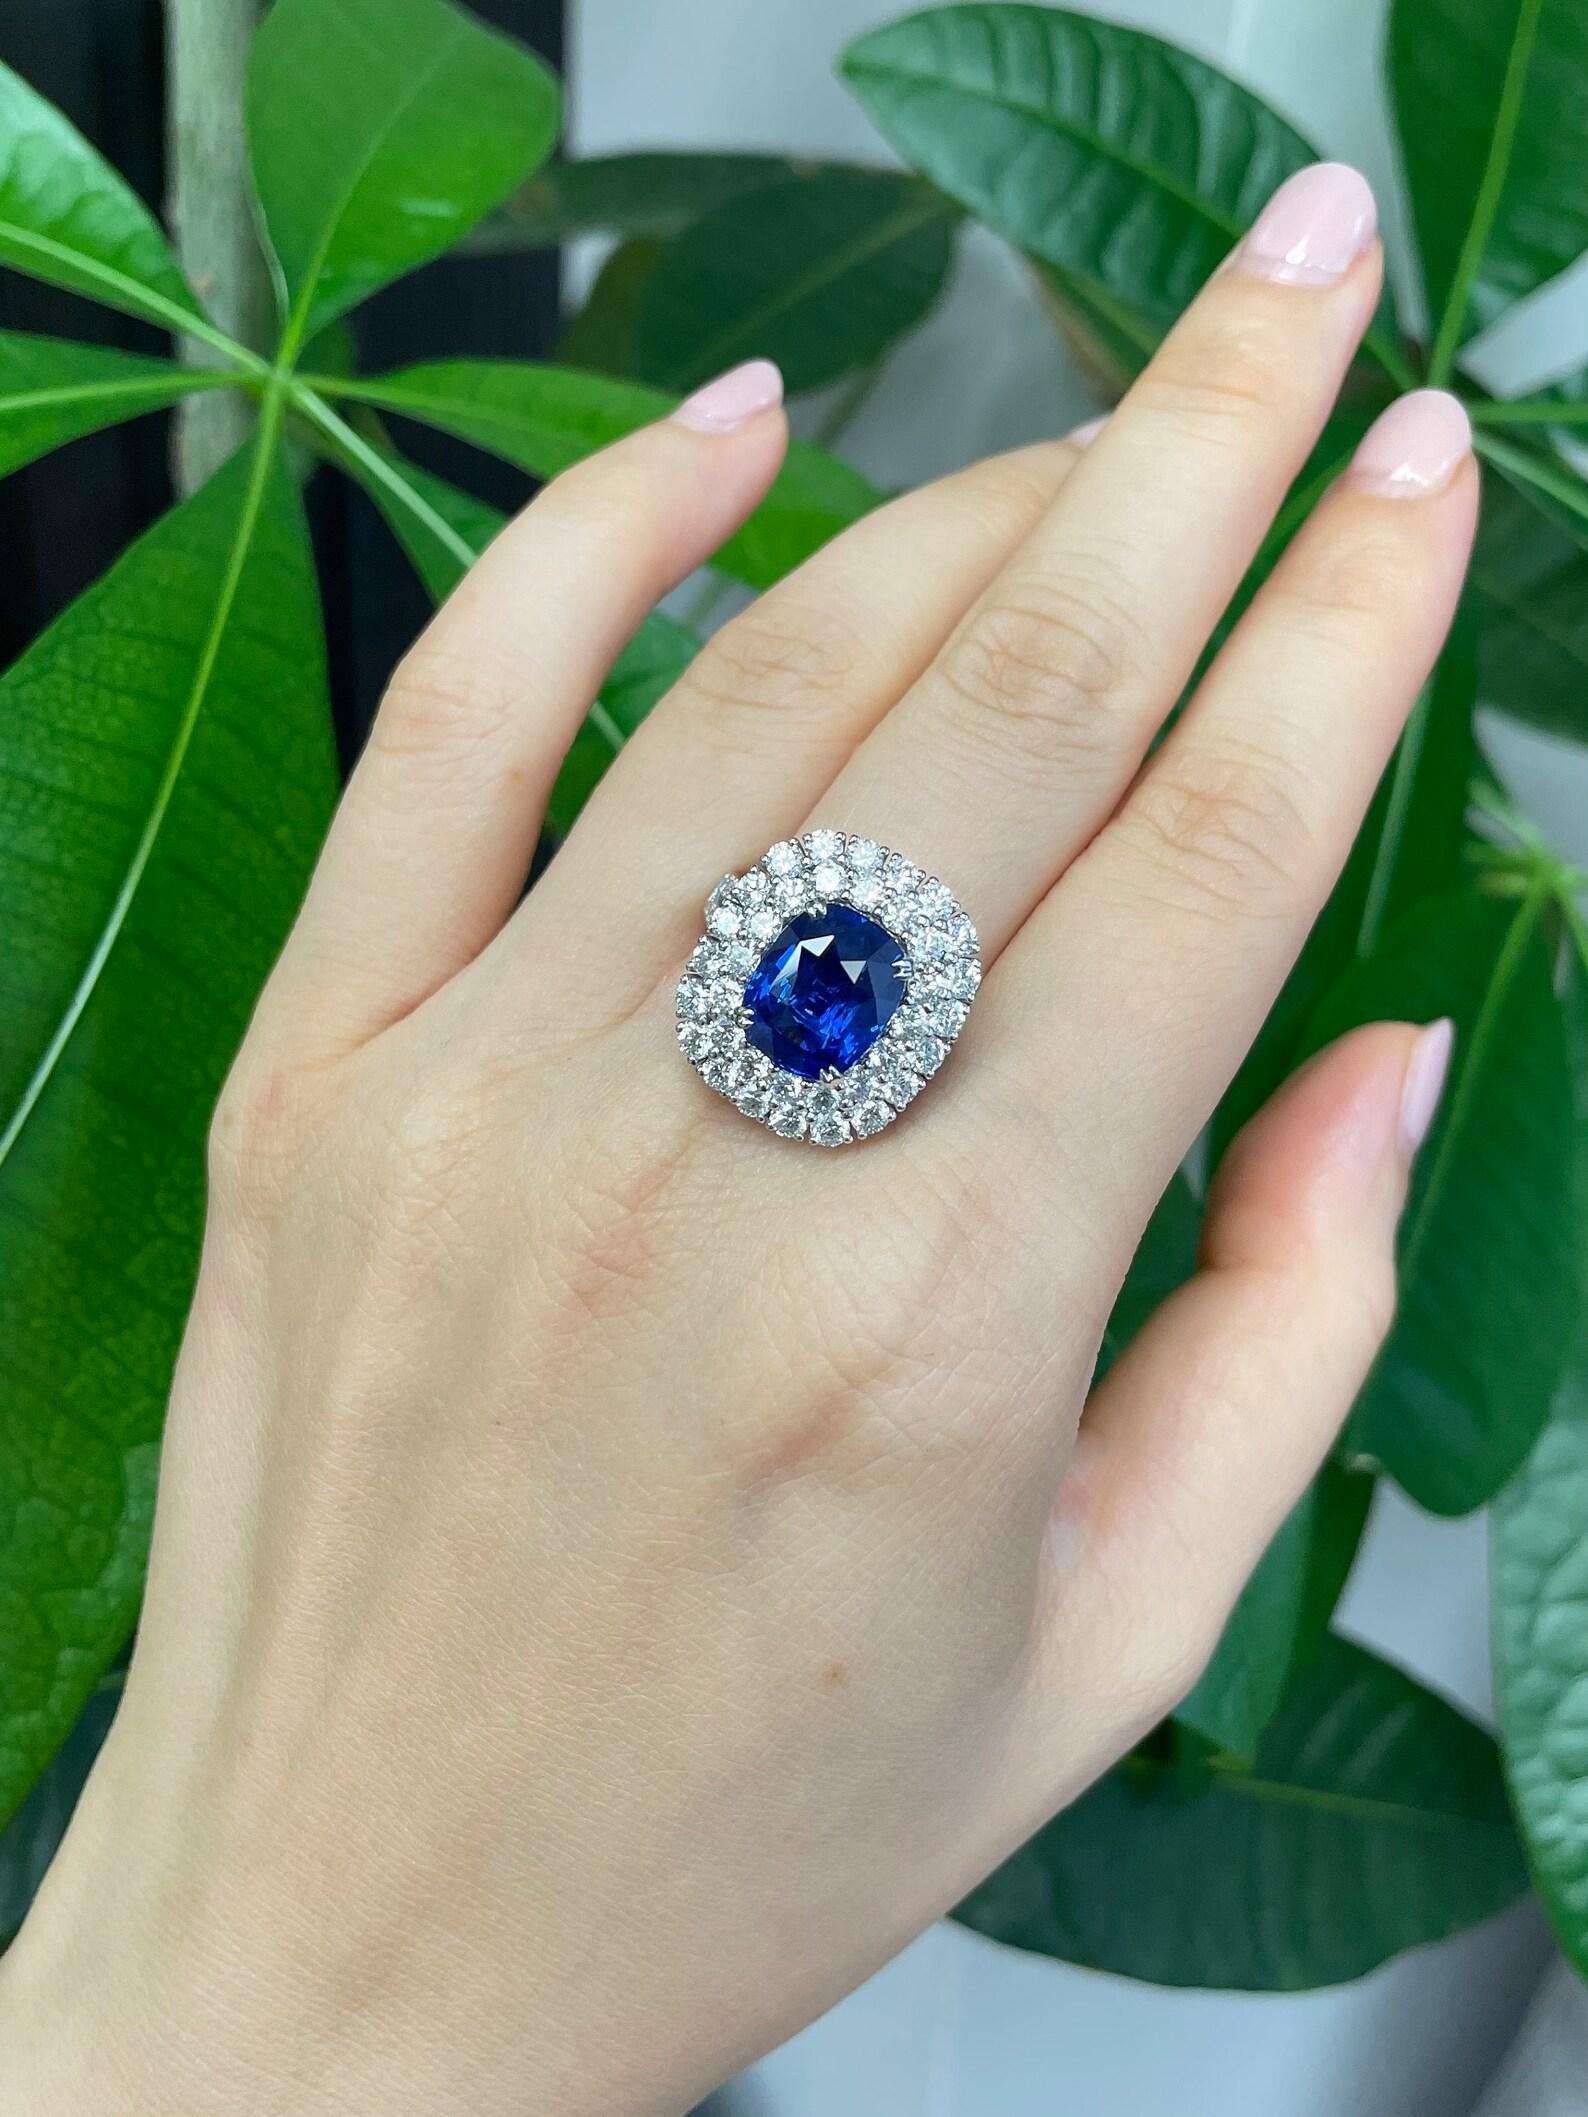 5.18ct natural cushion cut heated Blue Sapphire at the center
Blue sapphire size: 10.82 x 8.76 x 5.42mm
Blue sapphire color: Intense to vivid blue (Royal Blue)
Blue sapphire origin: Sri Lanka
Included GRS Certificate (No. GRS2018-019049)
Total carat